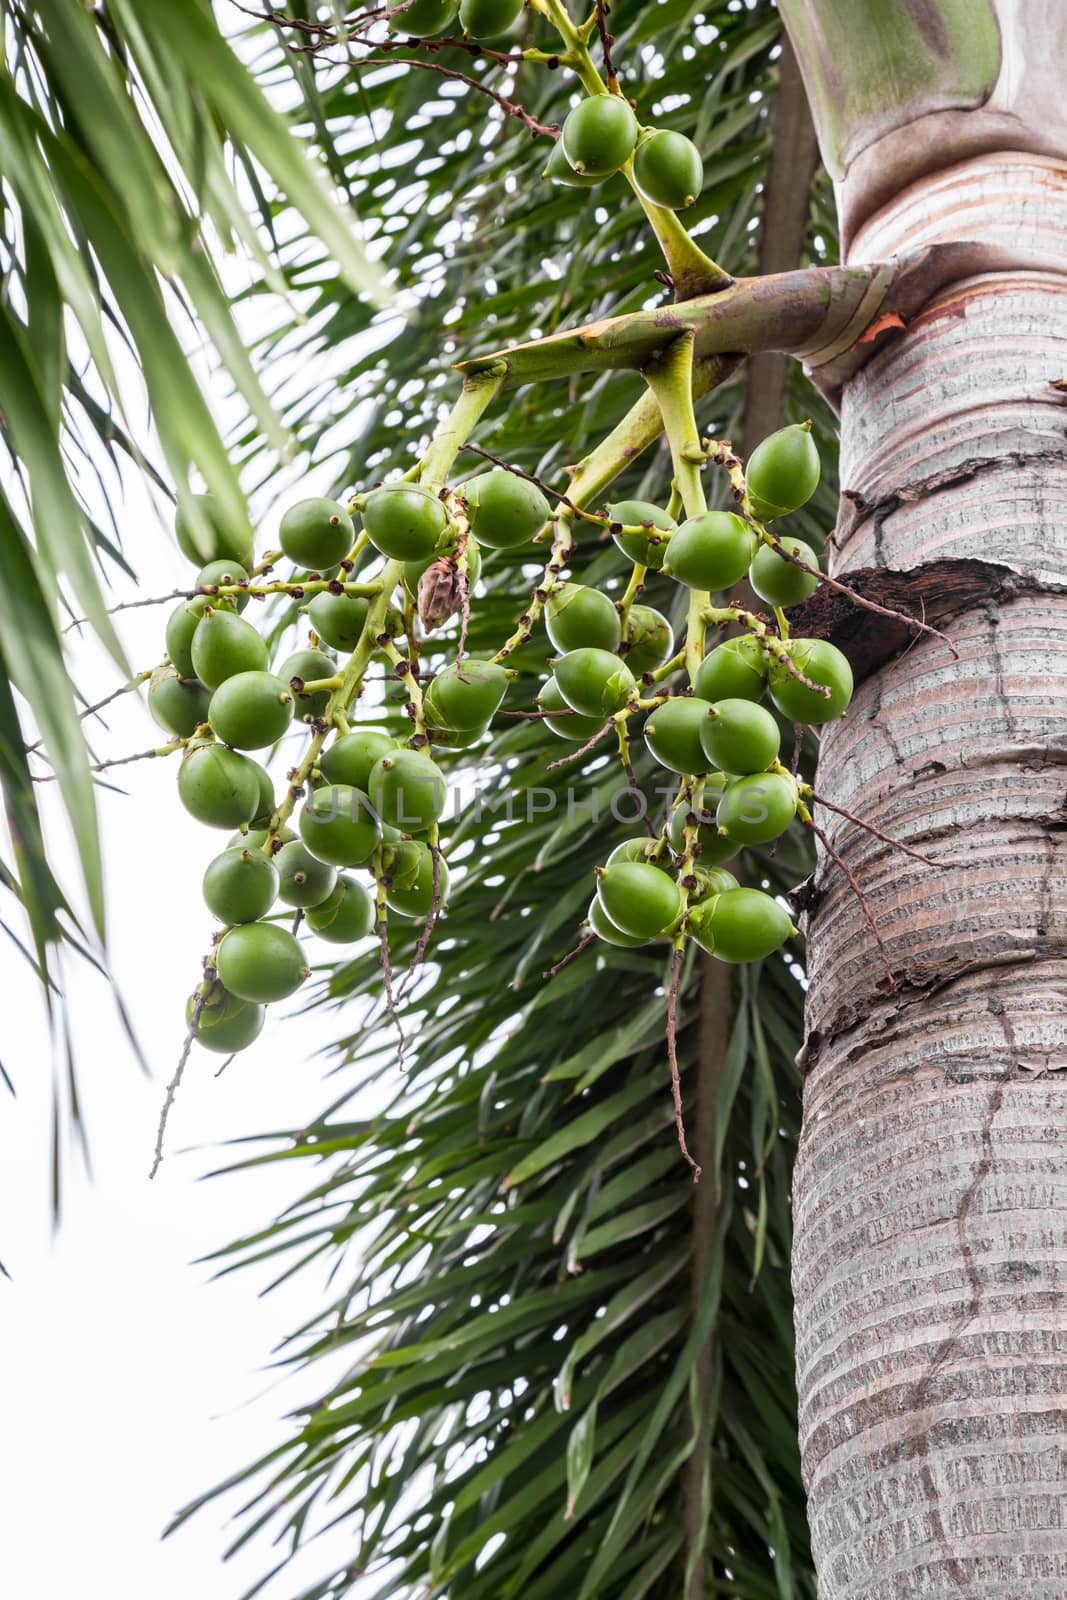 Areca catechu (Areca nut palm, Betel Nuts) All bunch into large by Gamjai